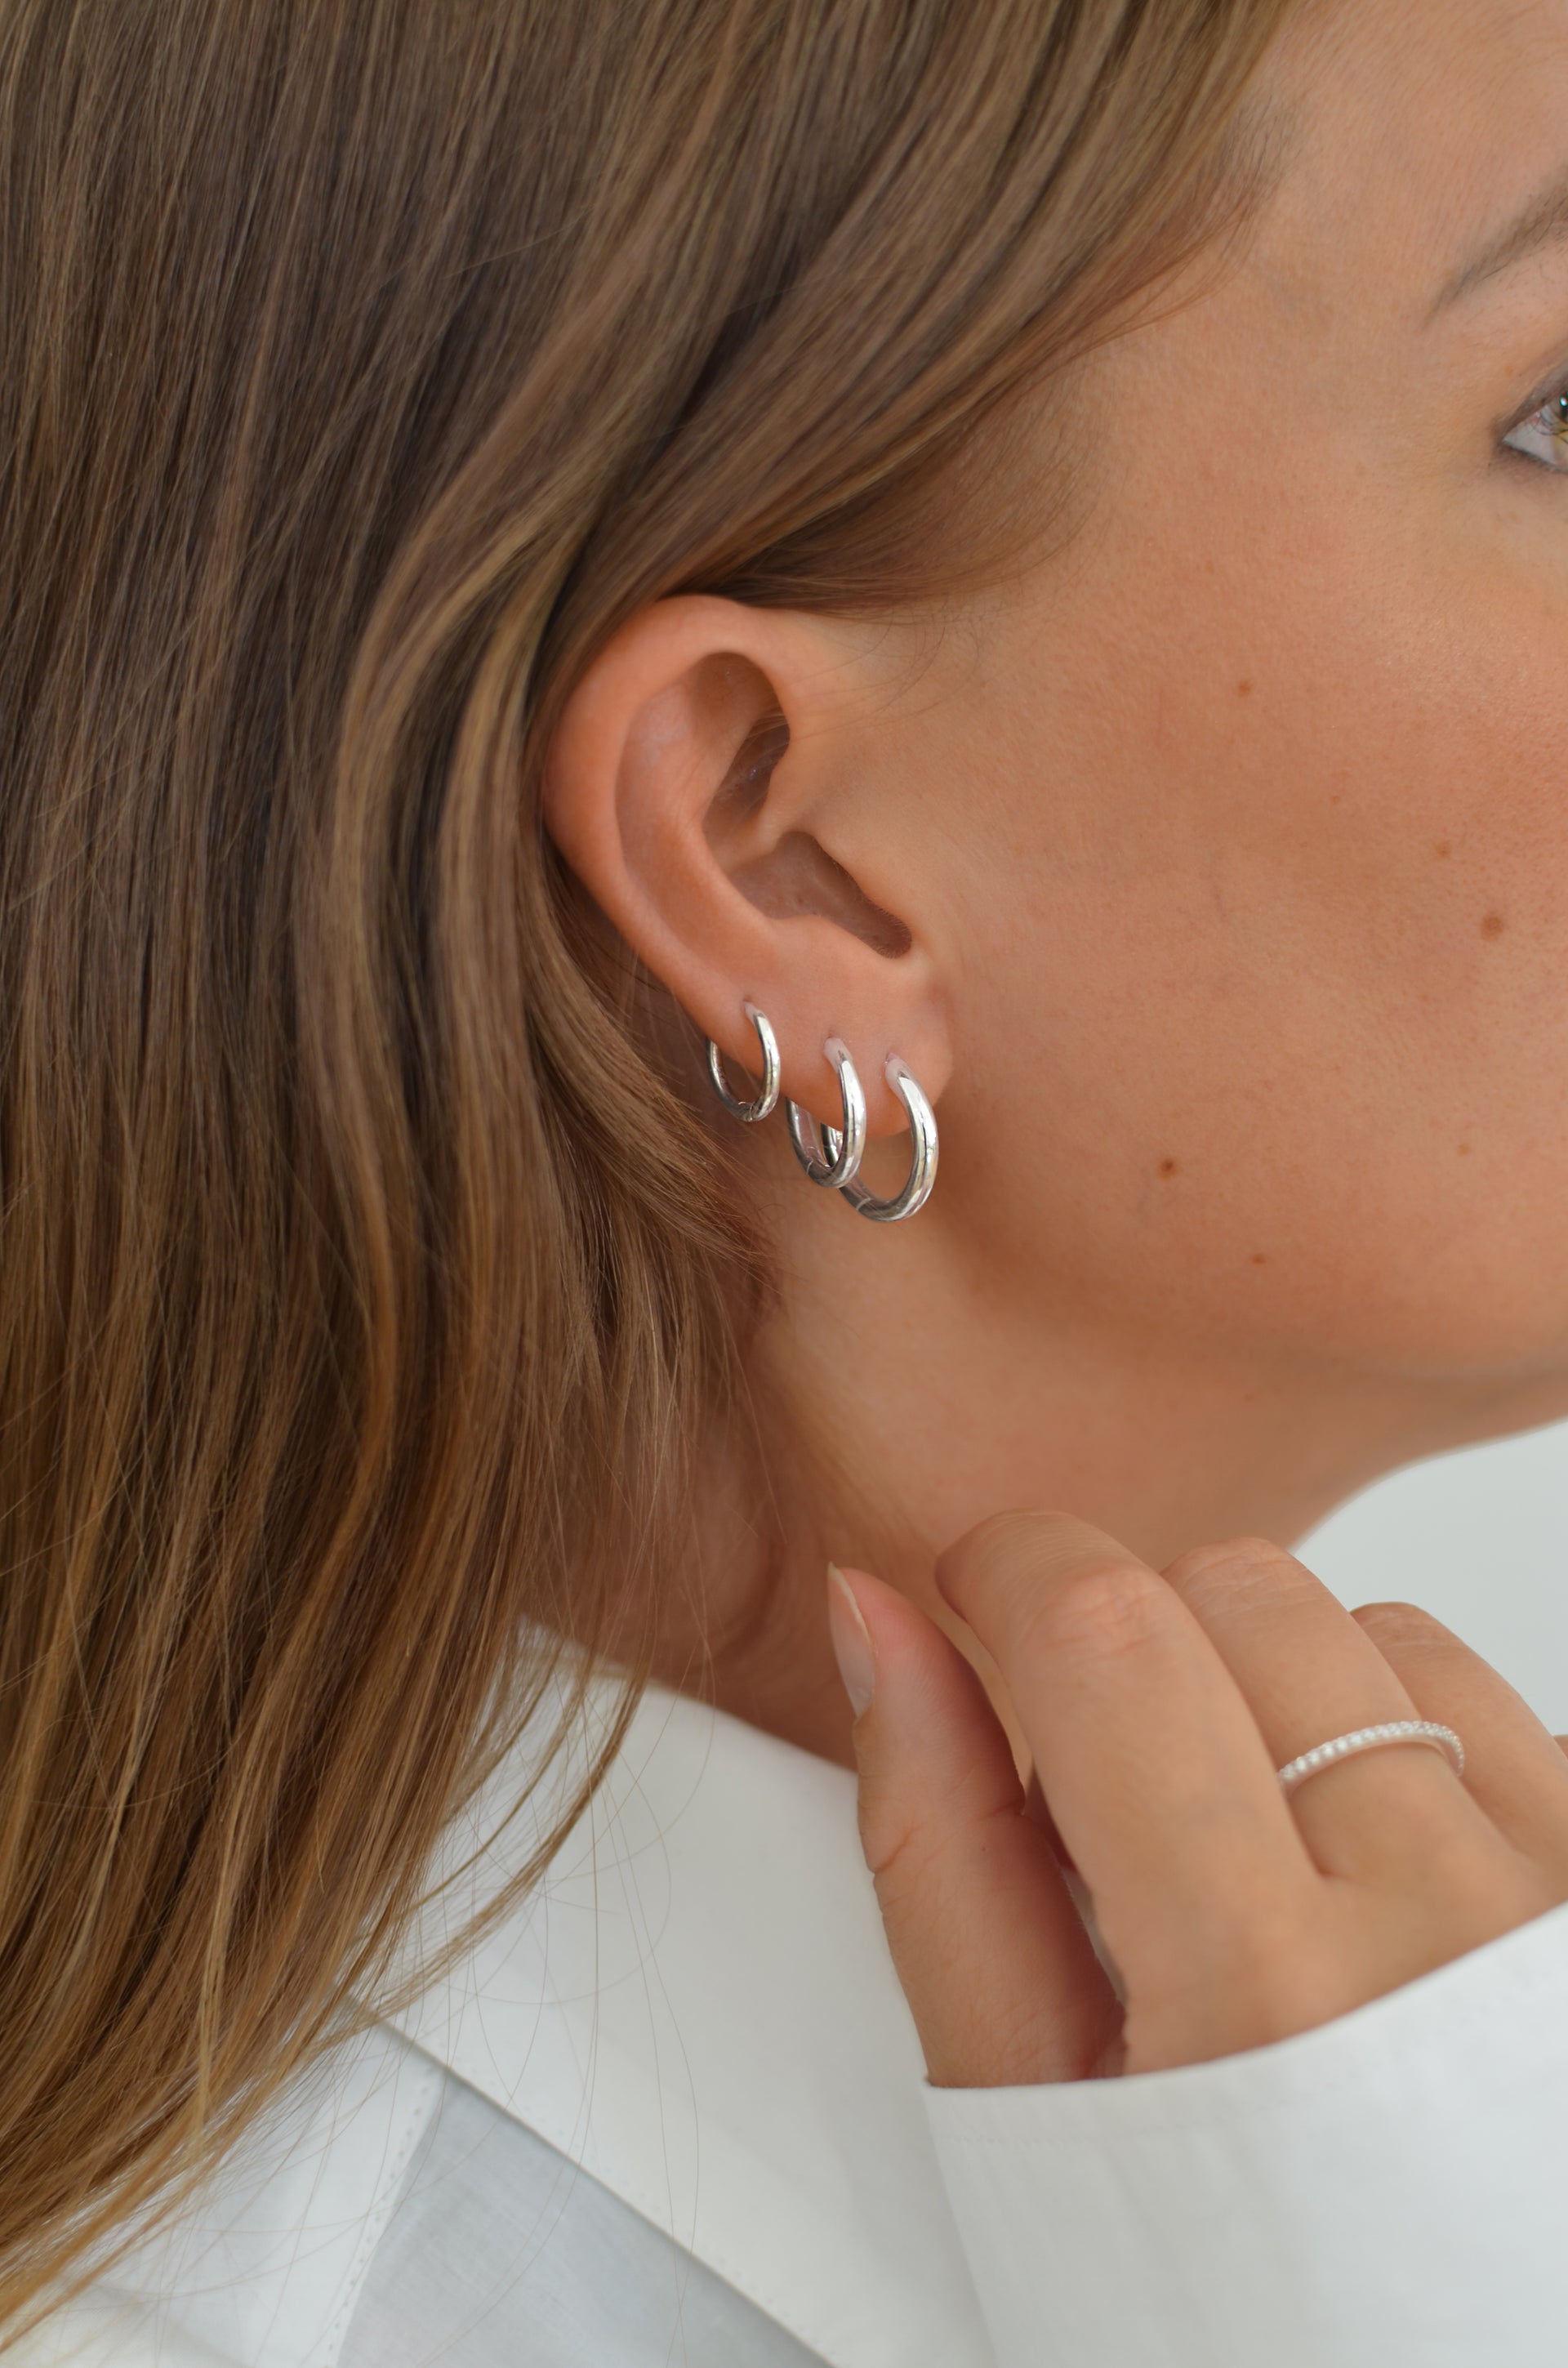 Three silver hoops in three different sizes